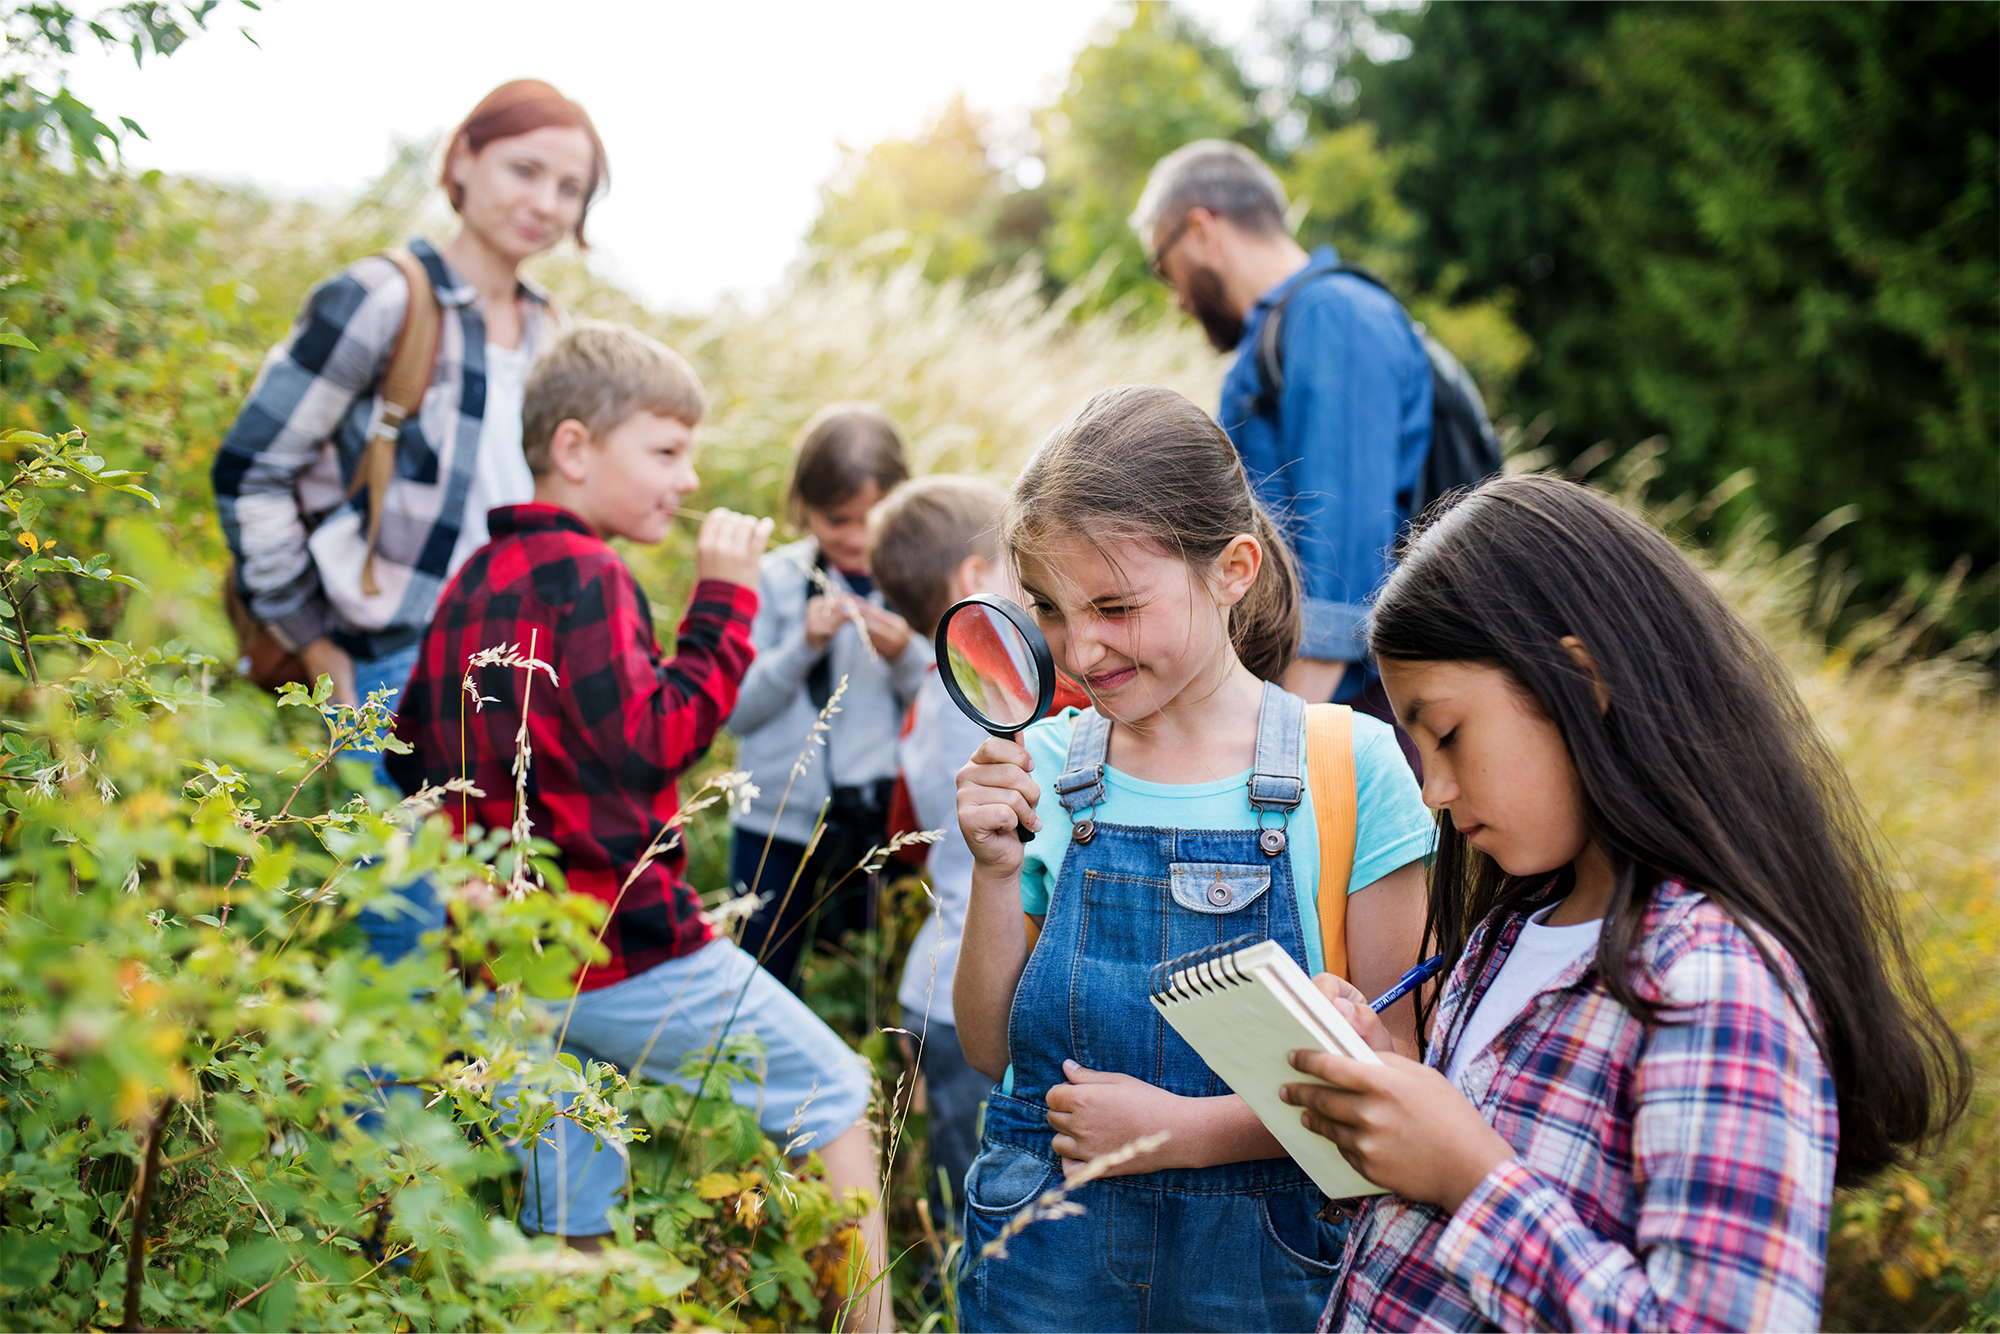 Navigating Liability Risks on School Field Trips: A group of small school children with teacher on field trip in nature, learning science.